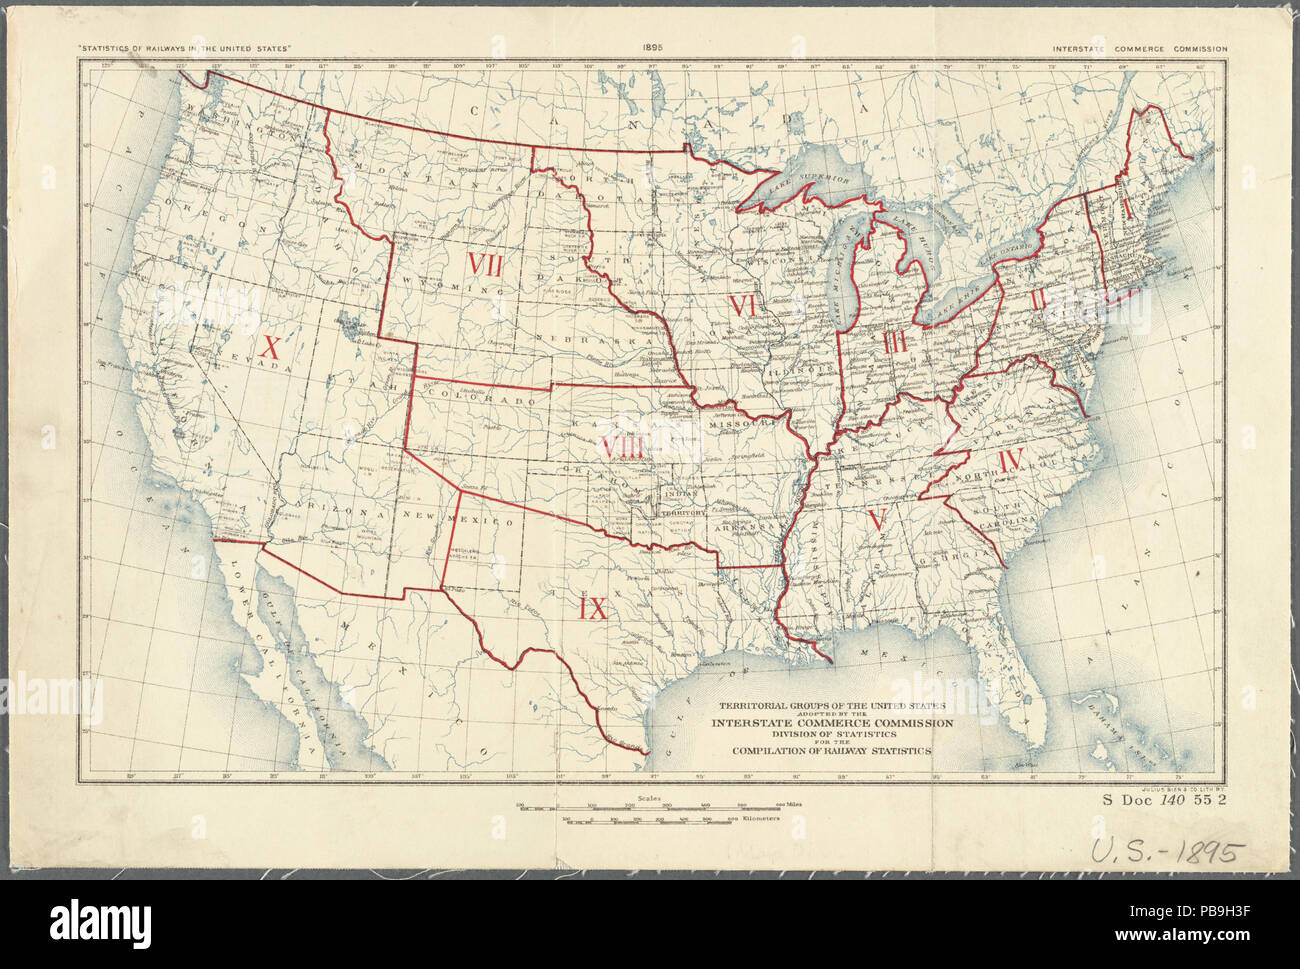 1605 Territorial groups of the United States adopted by the Interstate Commerce Commission Division of Statistics for the compilation of railway statistics (NYPL b20644034-5831479) Stock Photo